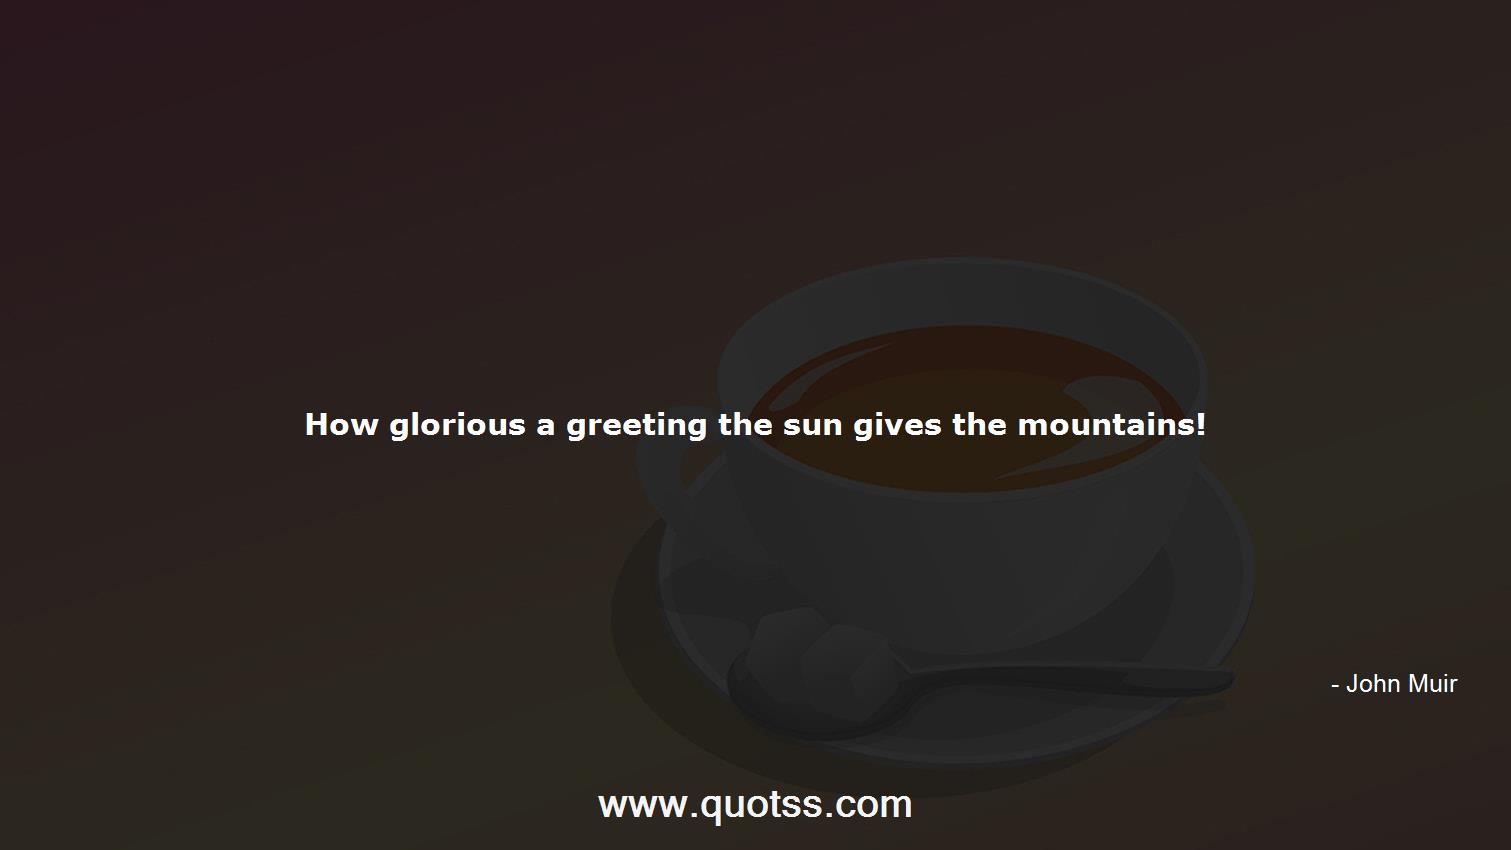 John Muir Quote on Quotss